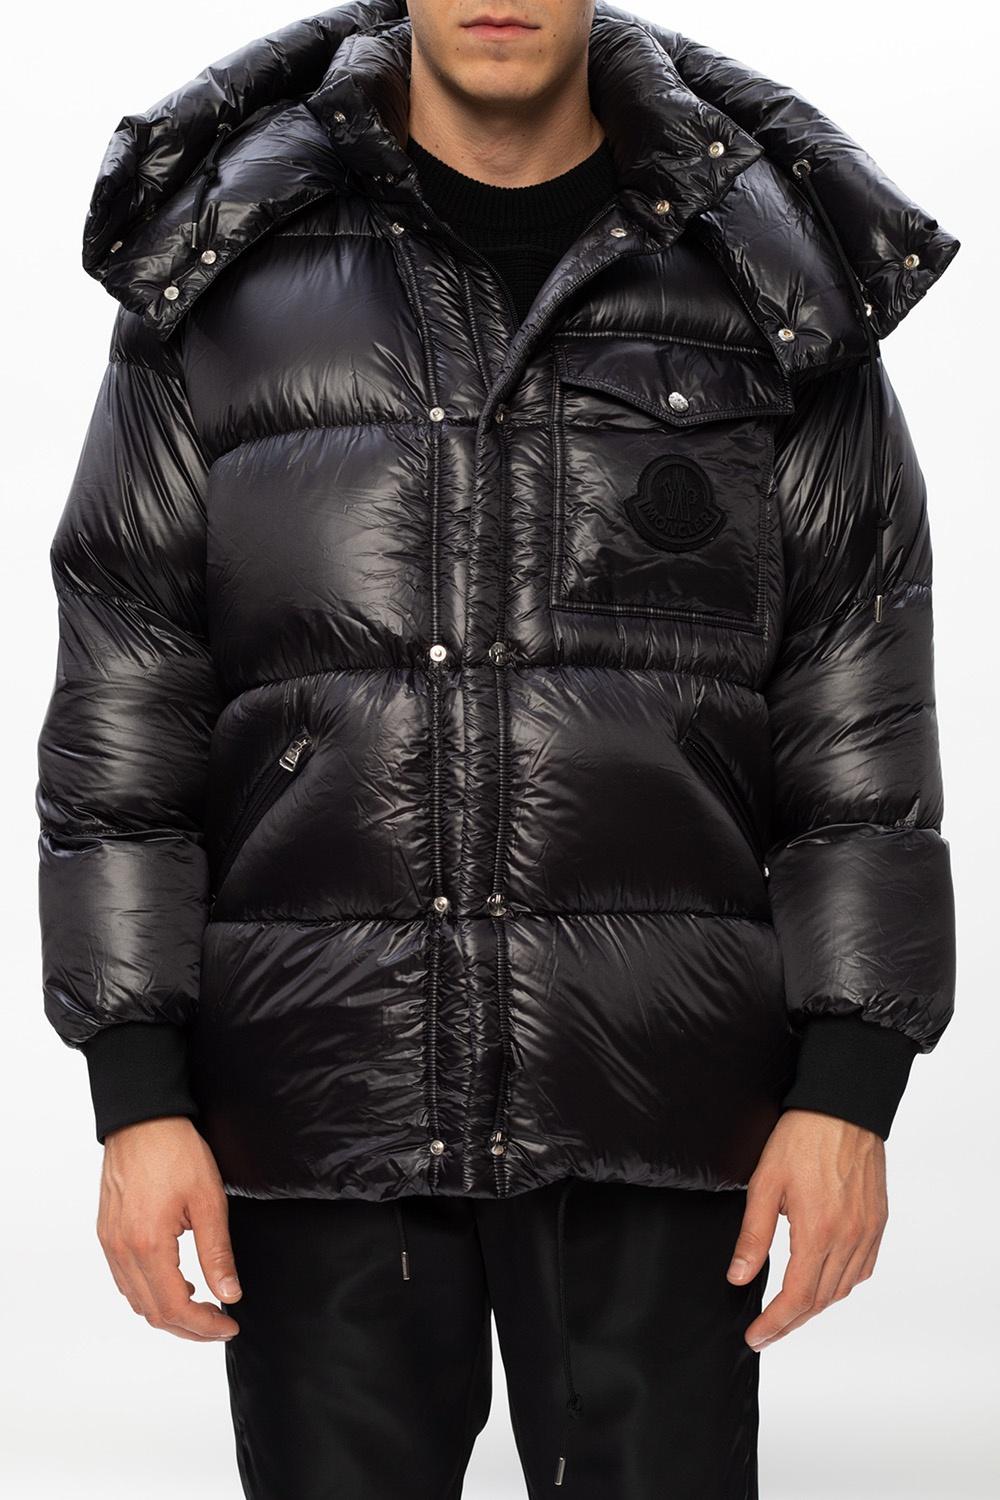 Moncler 'lamentin' Quilted Down Jacket With Hood in Black for Men - Lyst